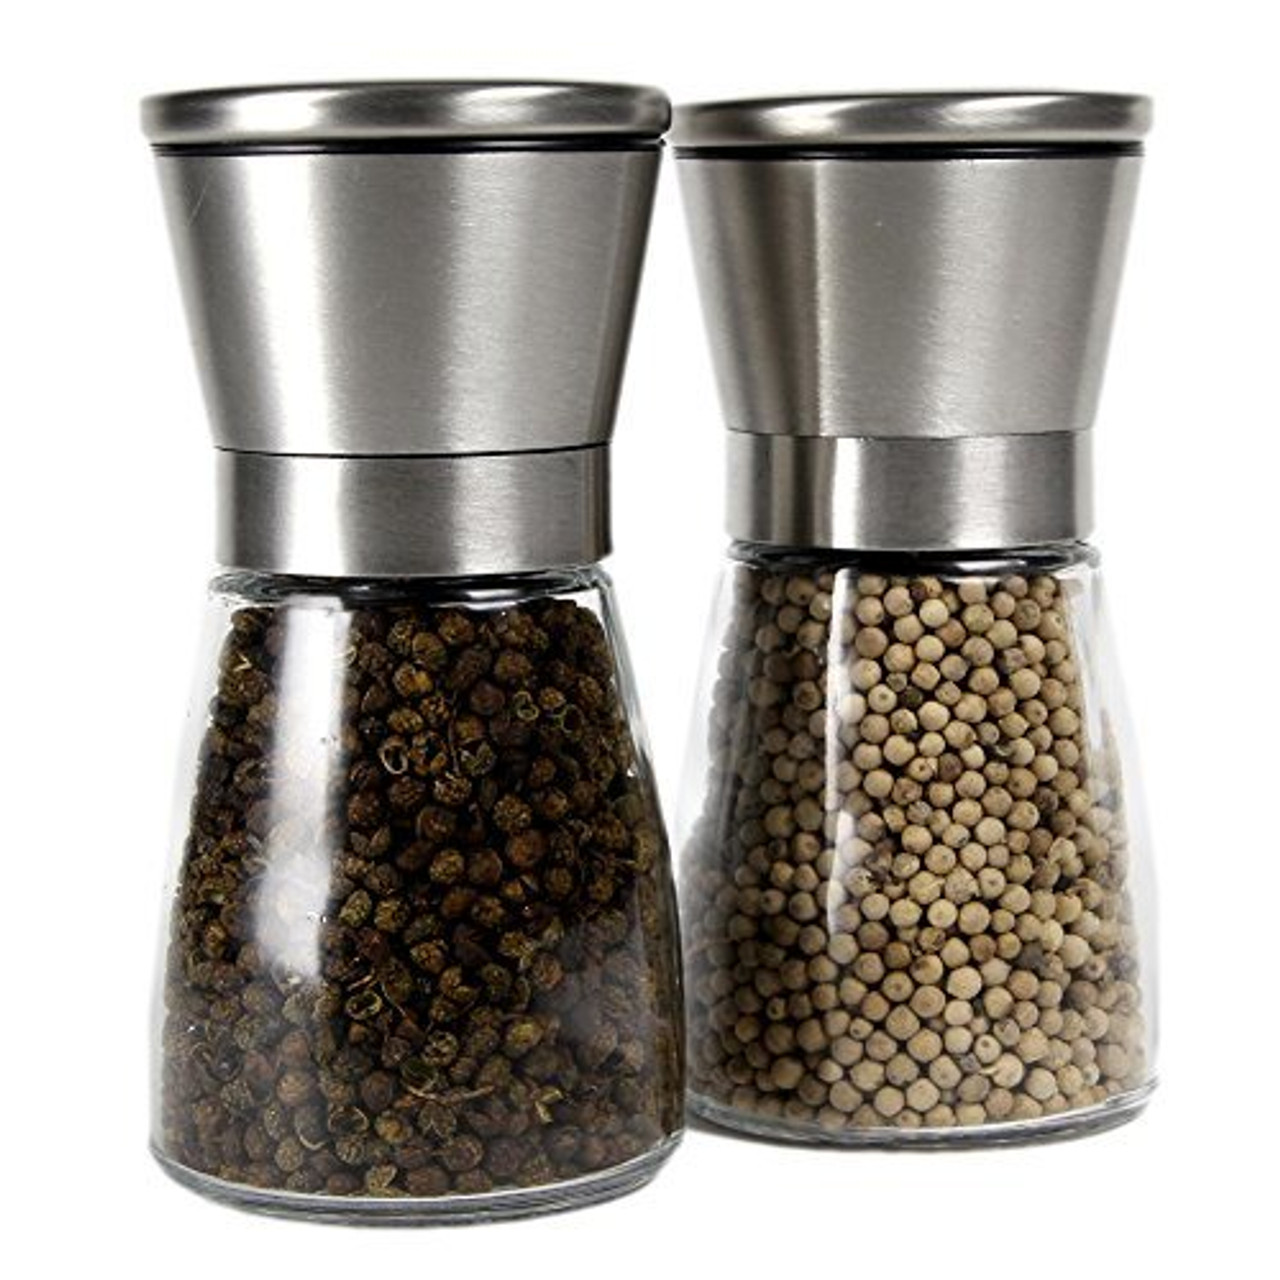 https://cdn11.bigcommerce.com/s-m7jtoq9igp/images/stencil/1280x1280/products/271/1784/Salt-and-Pepper-Mill-Glass-Pepper-Mill-Glass-Spice-Mill-Glass-Salt-Mill__94023.1553898476.jpg?c=2